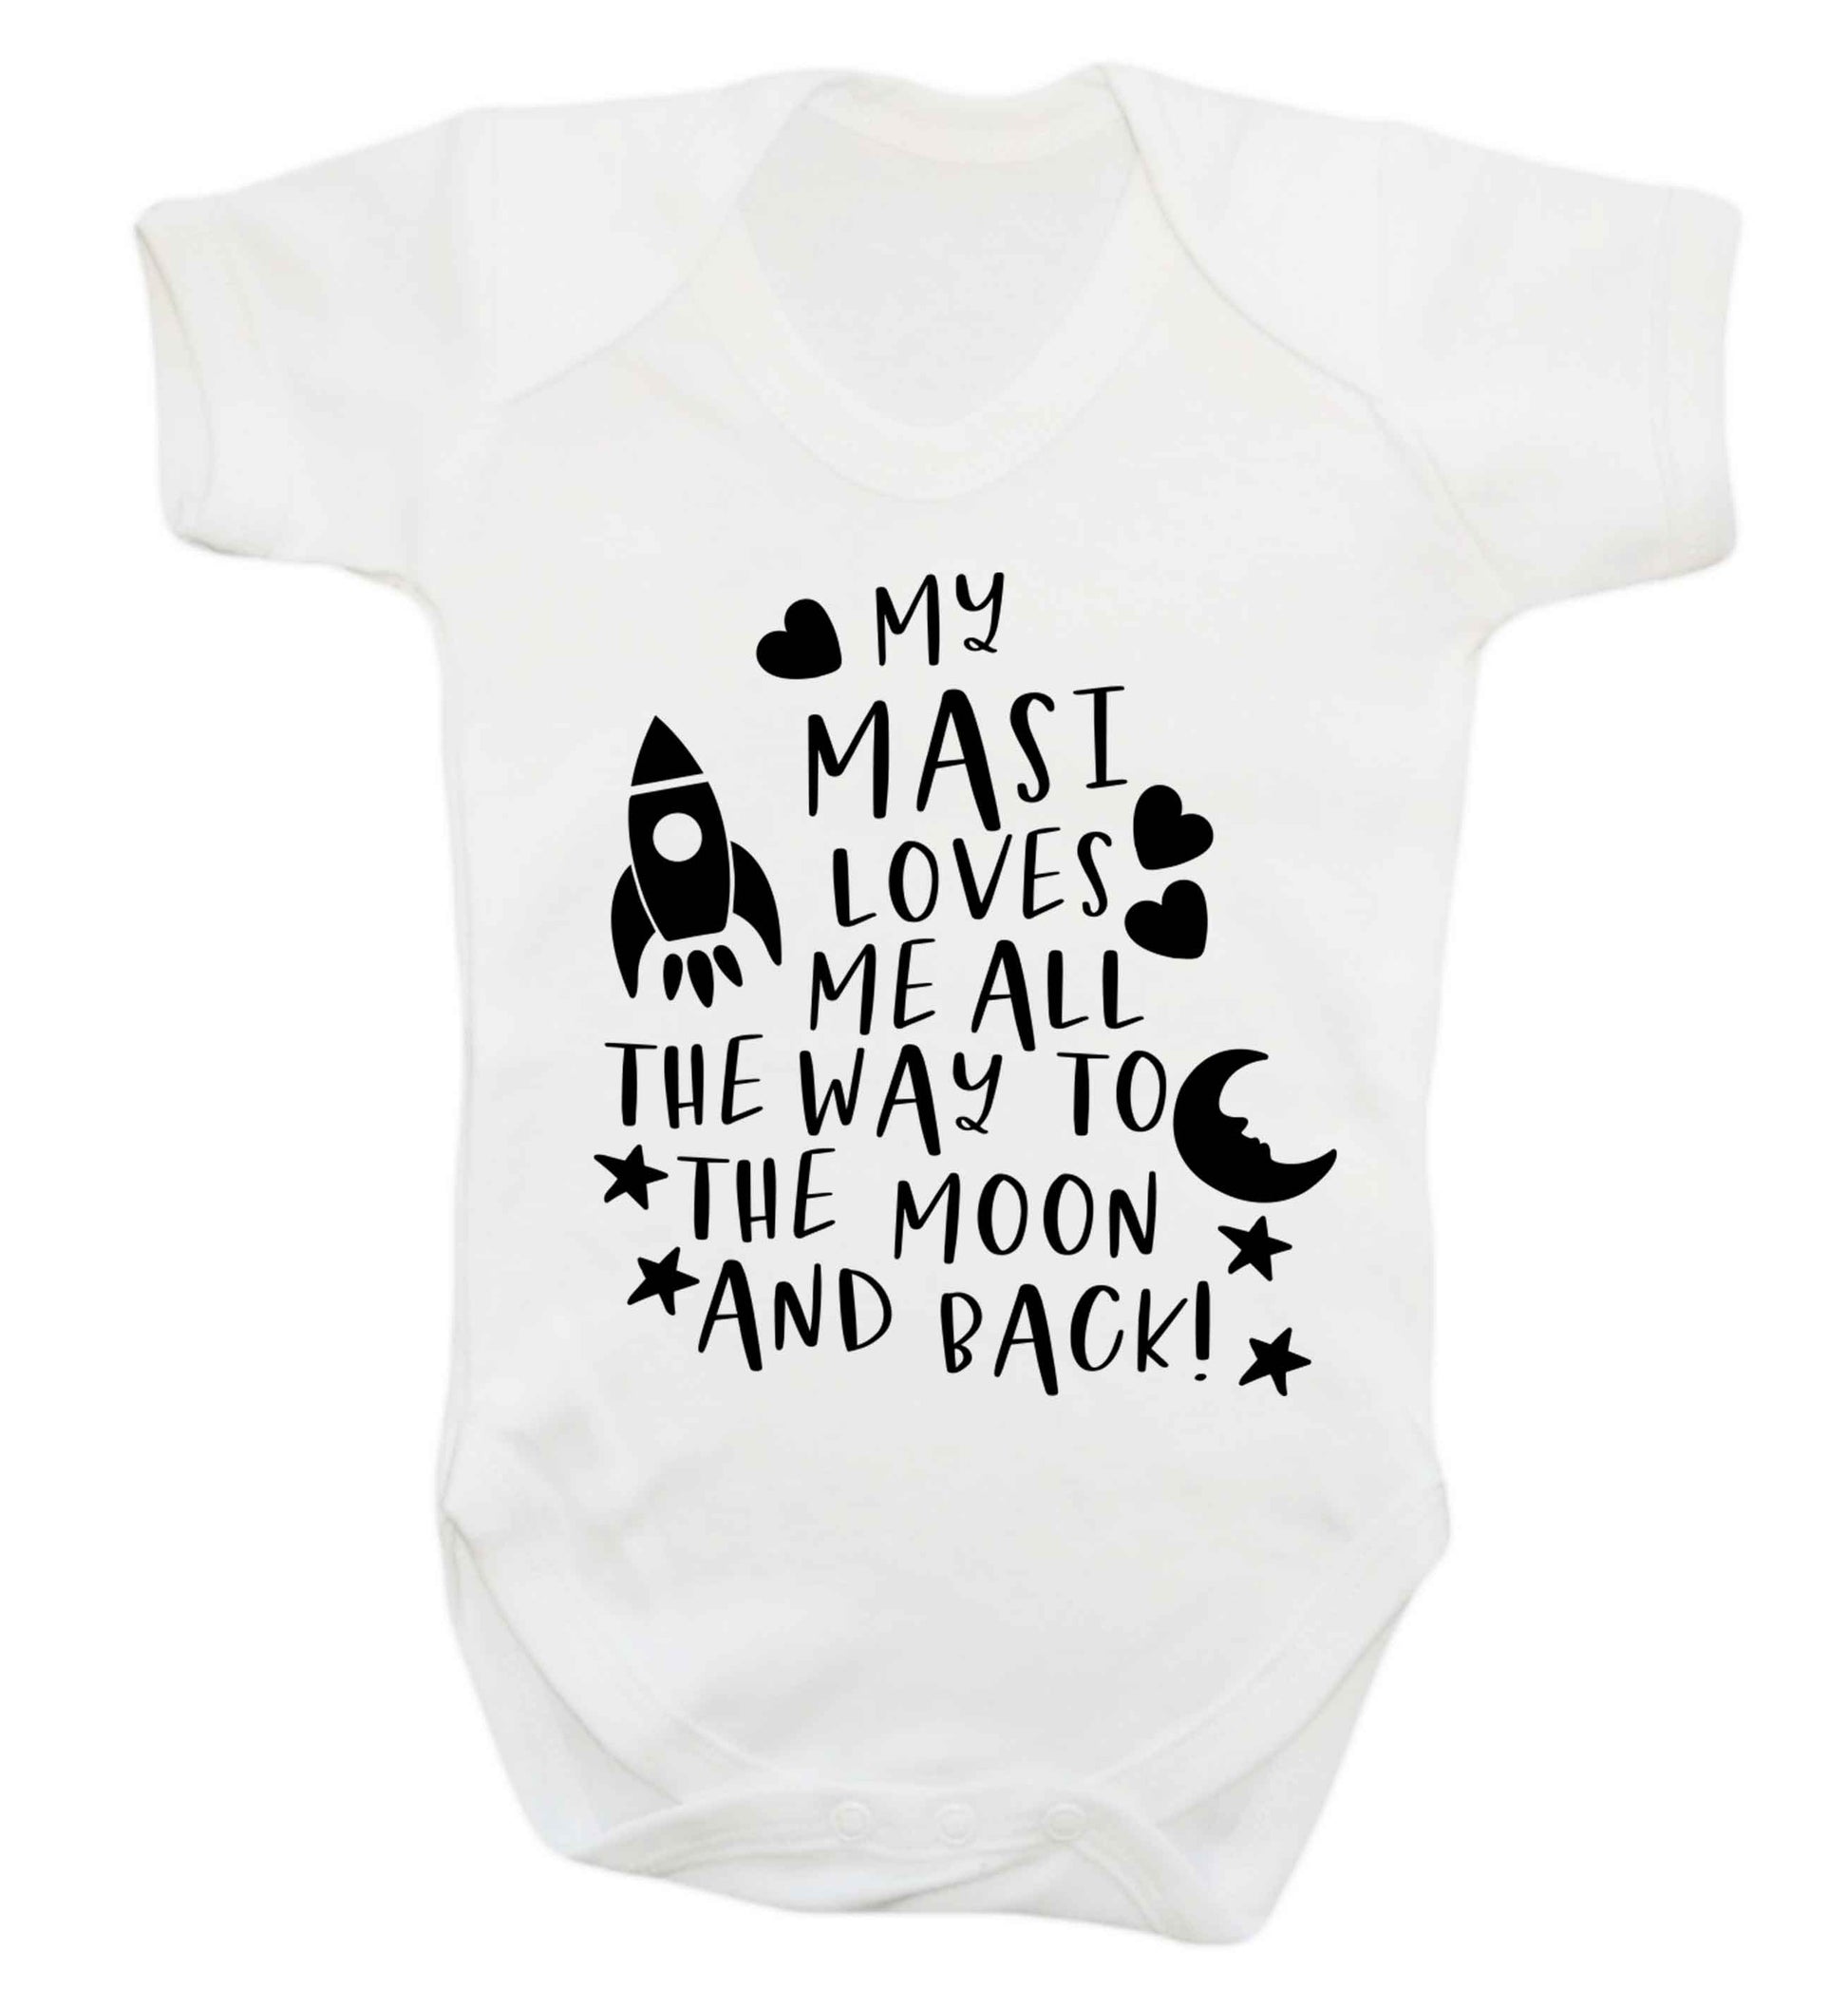 My masi loves me all the way to the moon and back Baby Vest white 18-24 months